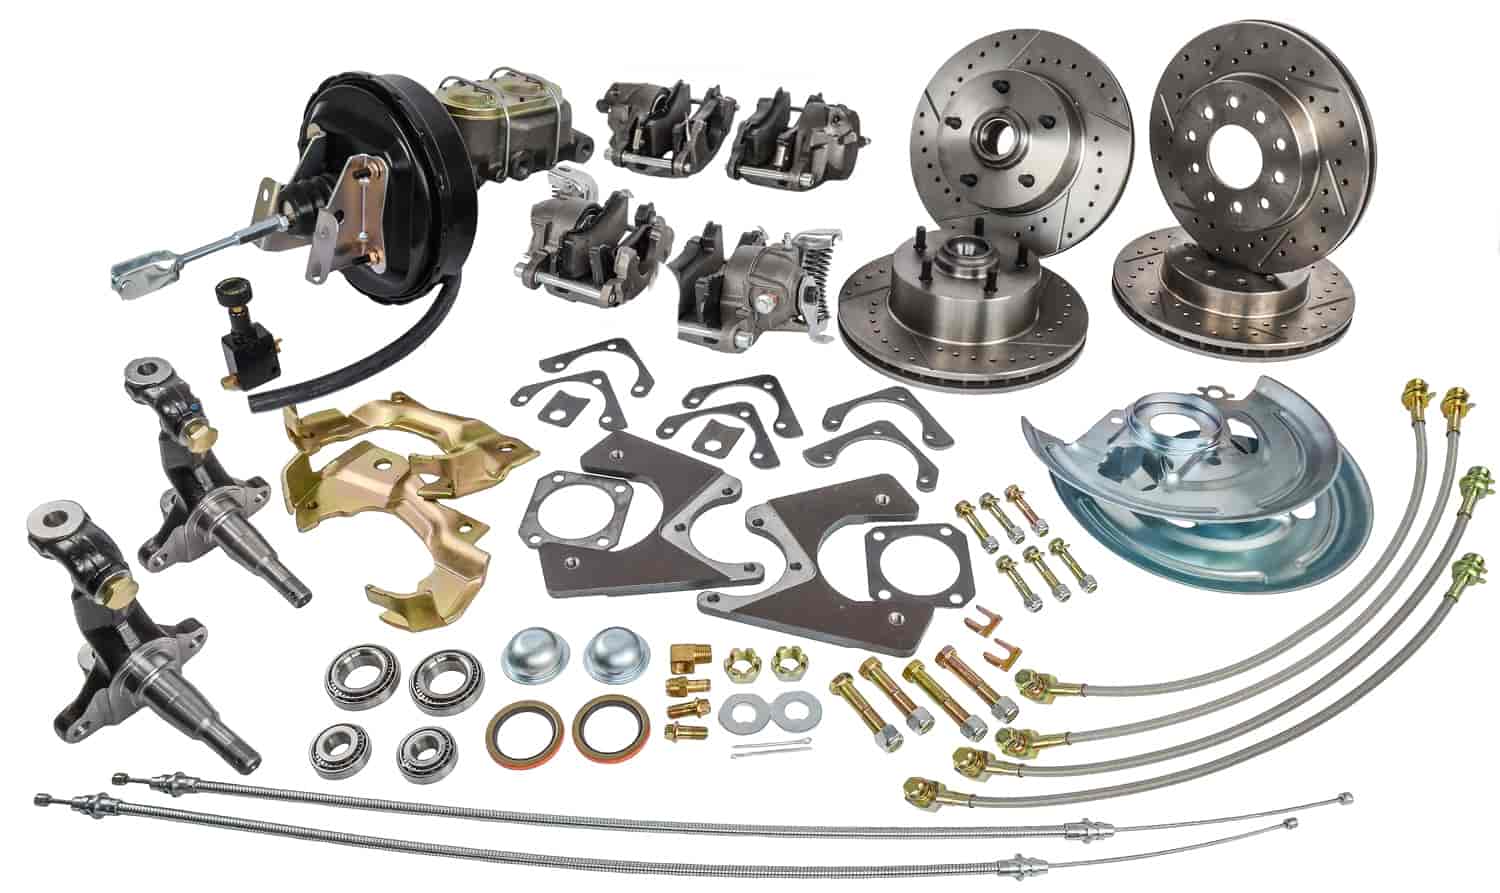 All-Wheel Disc Brake Conversion Kit GM Staggered Shock Configuration